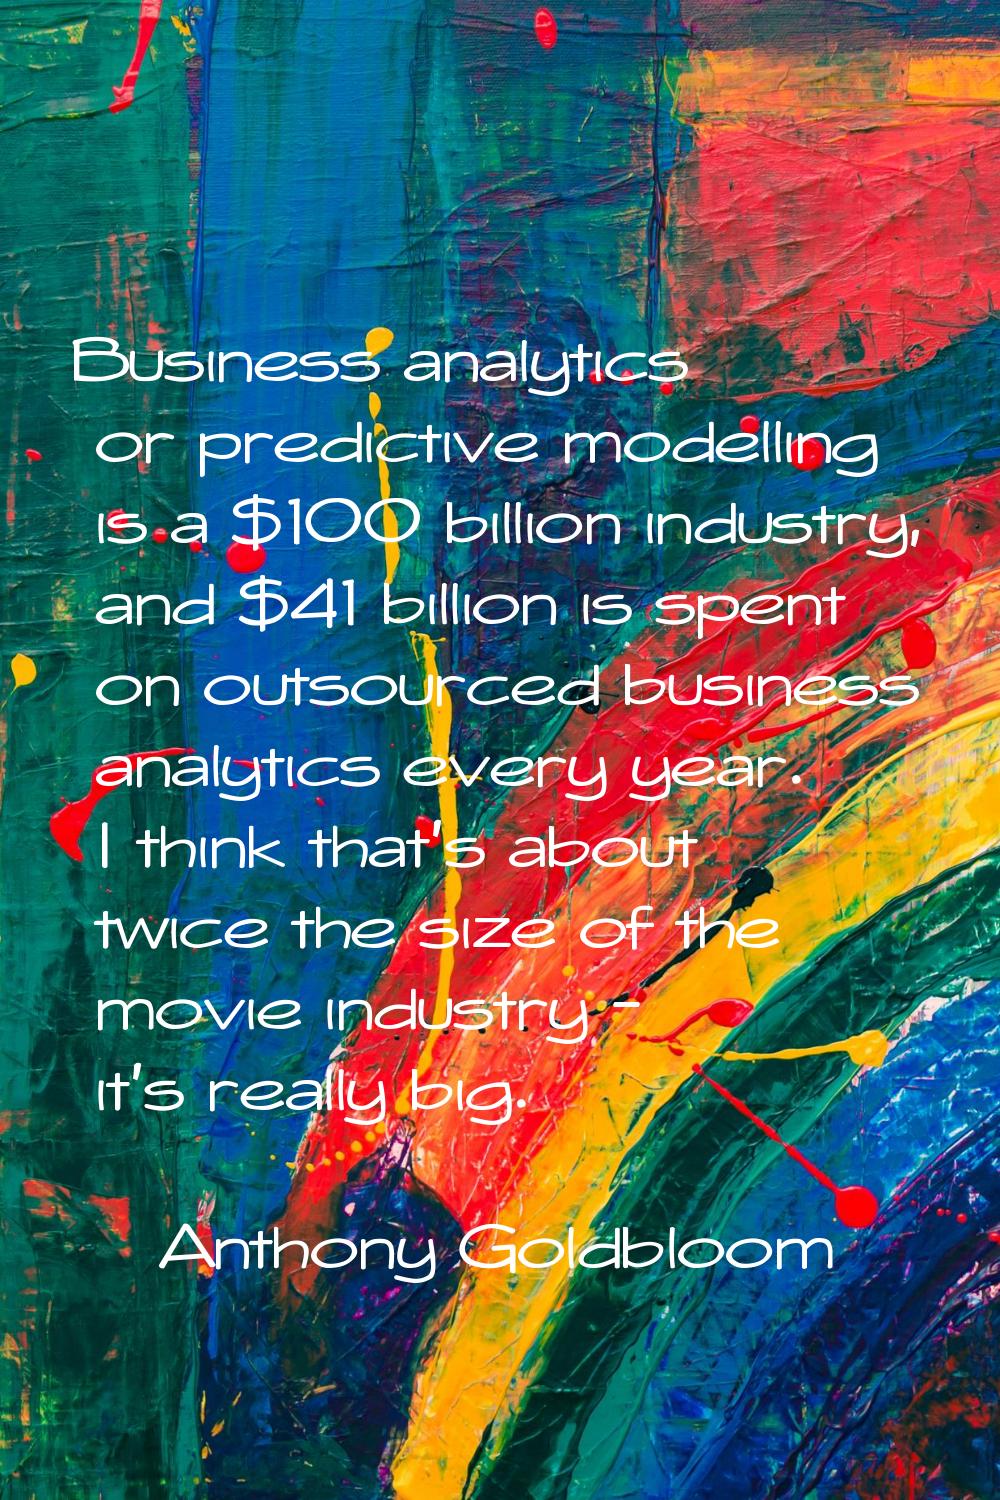 Business analytics or predictive modelling is a $100 billion industry, and $41 billion is spent on 